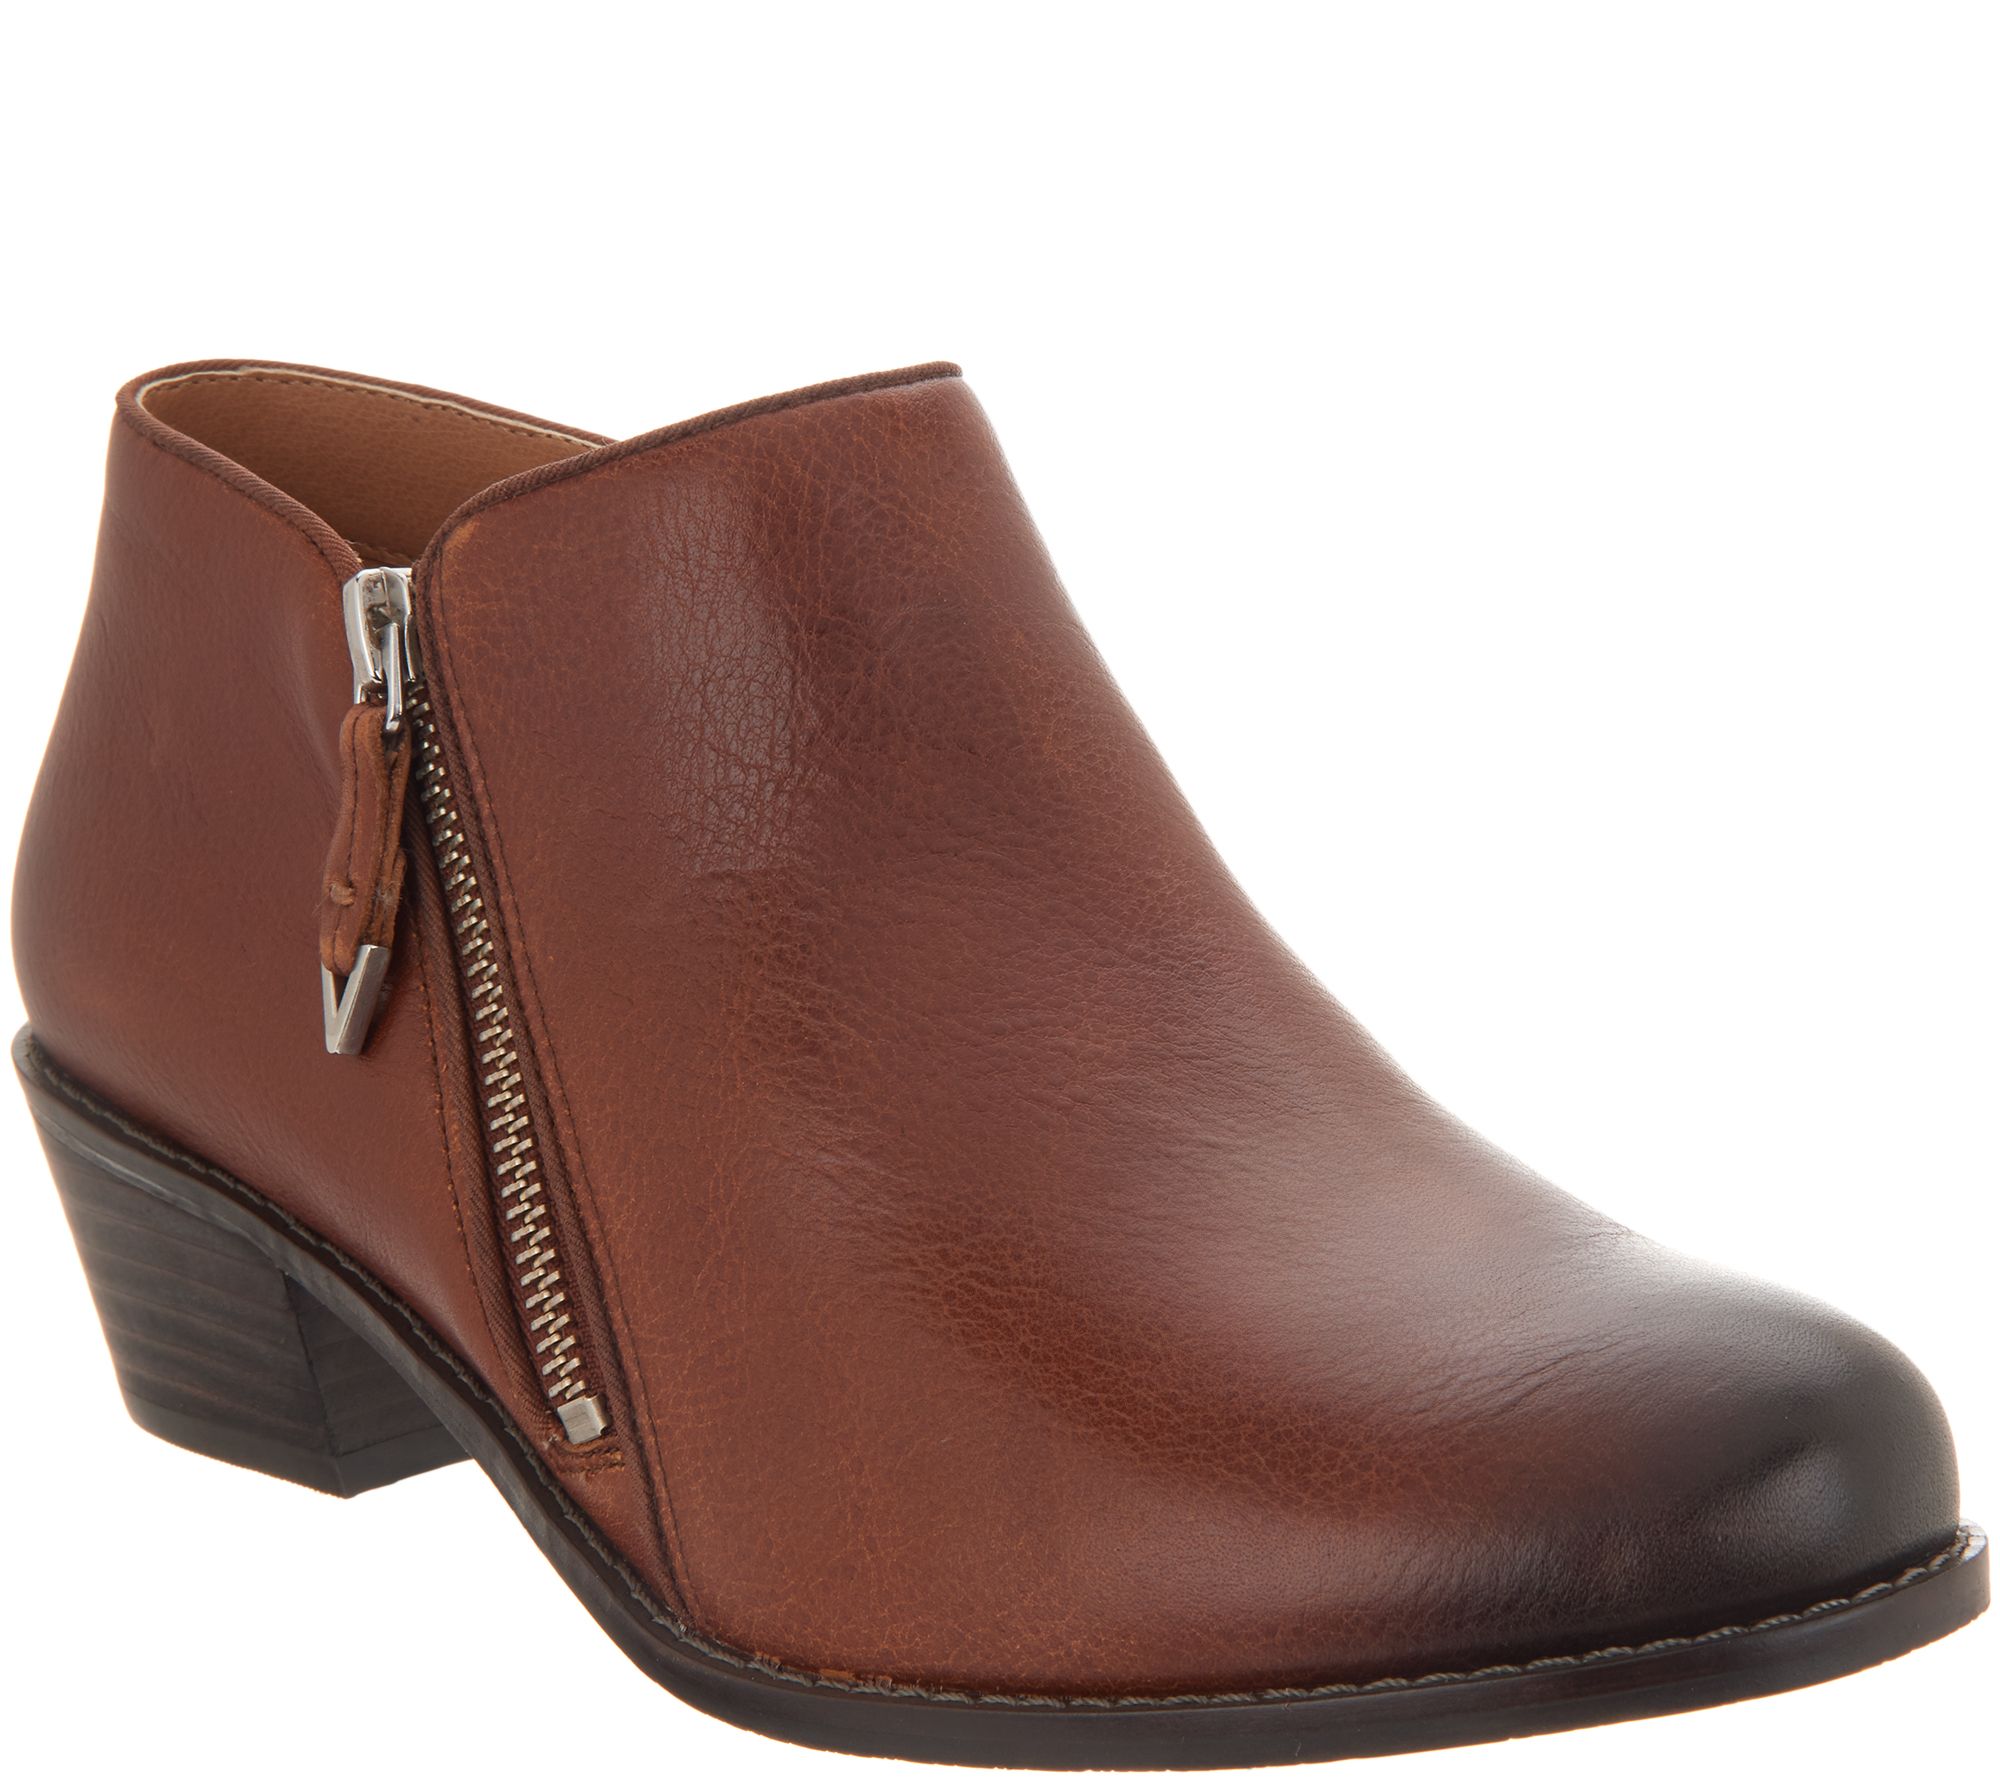 Vionic Leather Ankle Boots - Jolene 